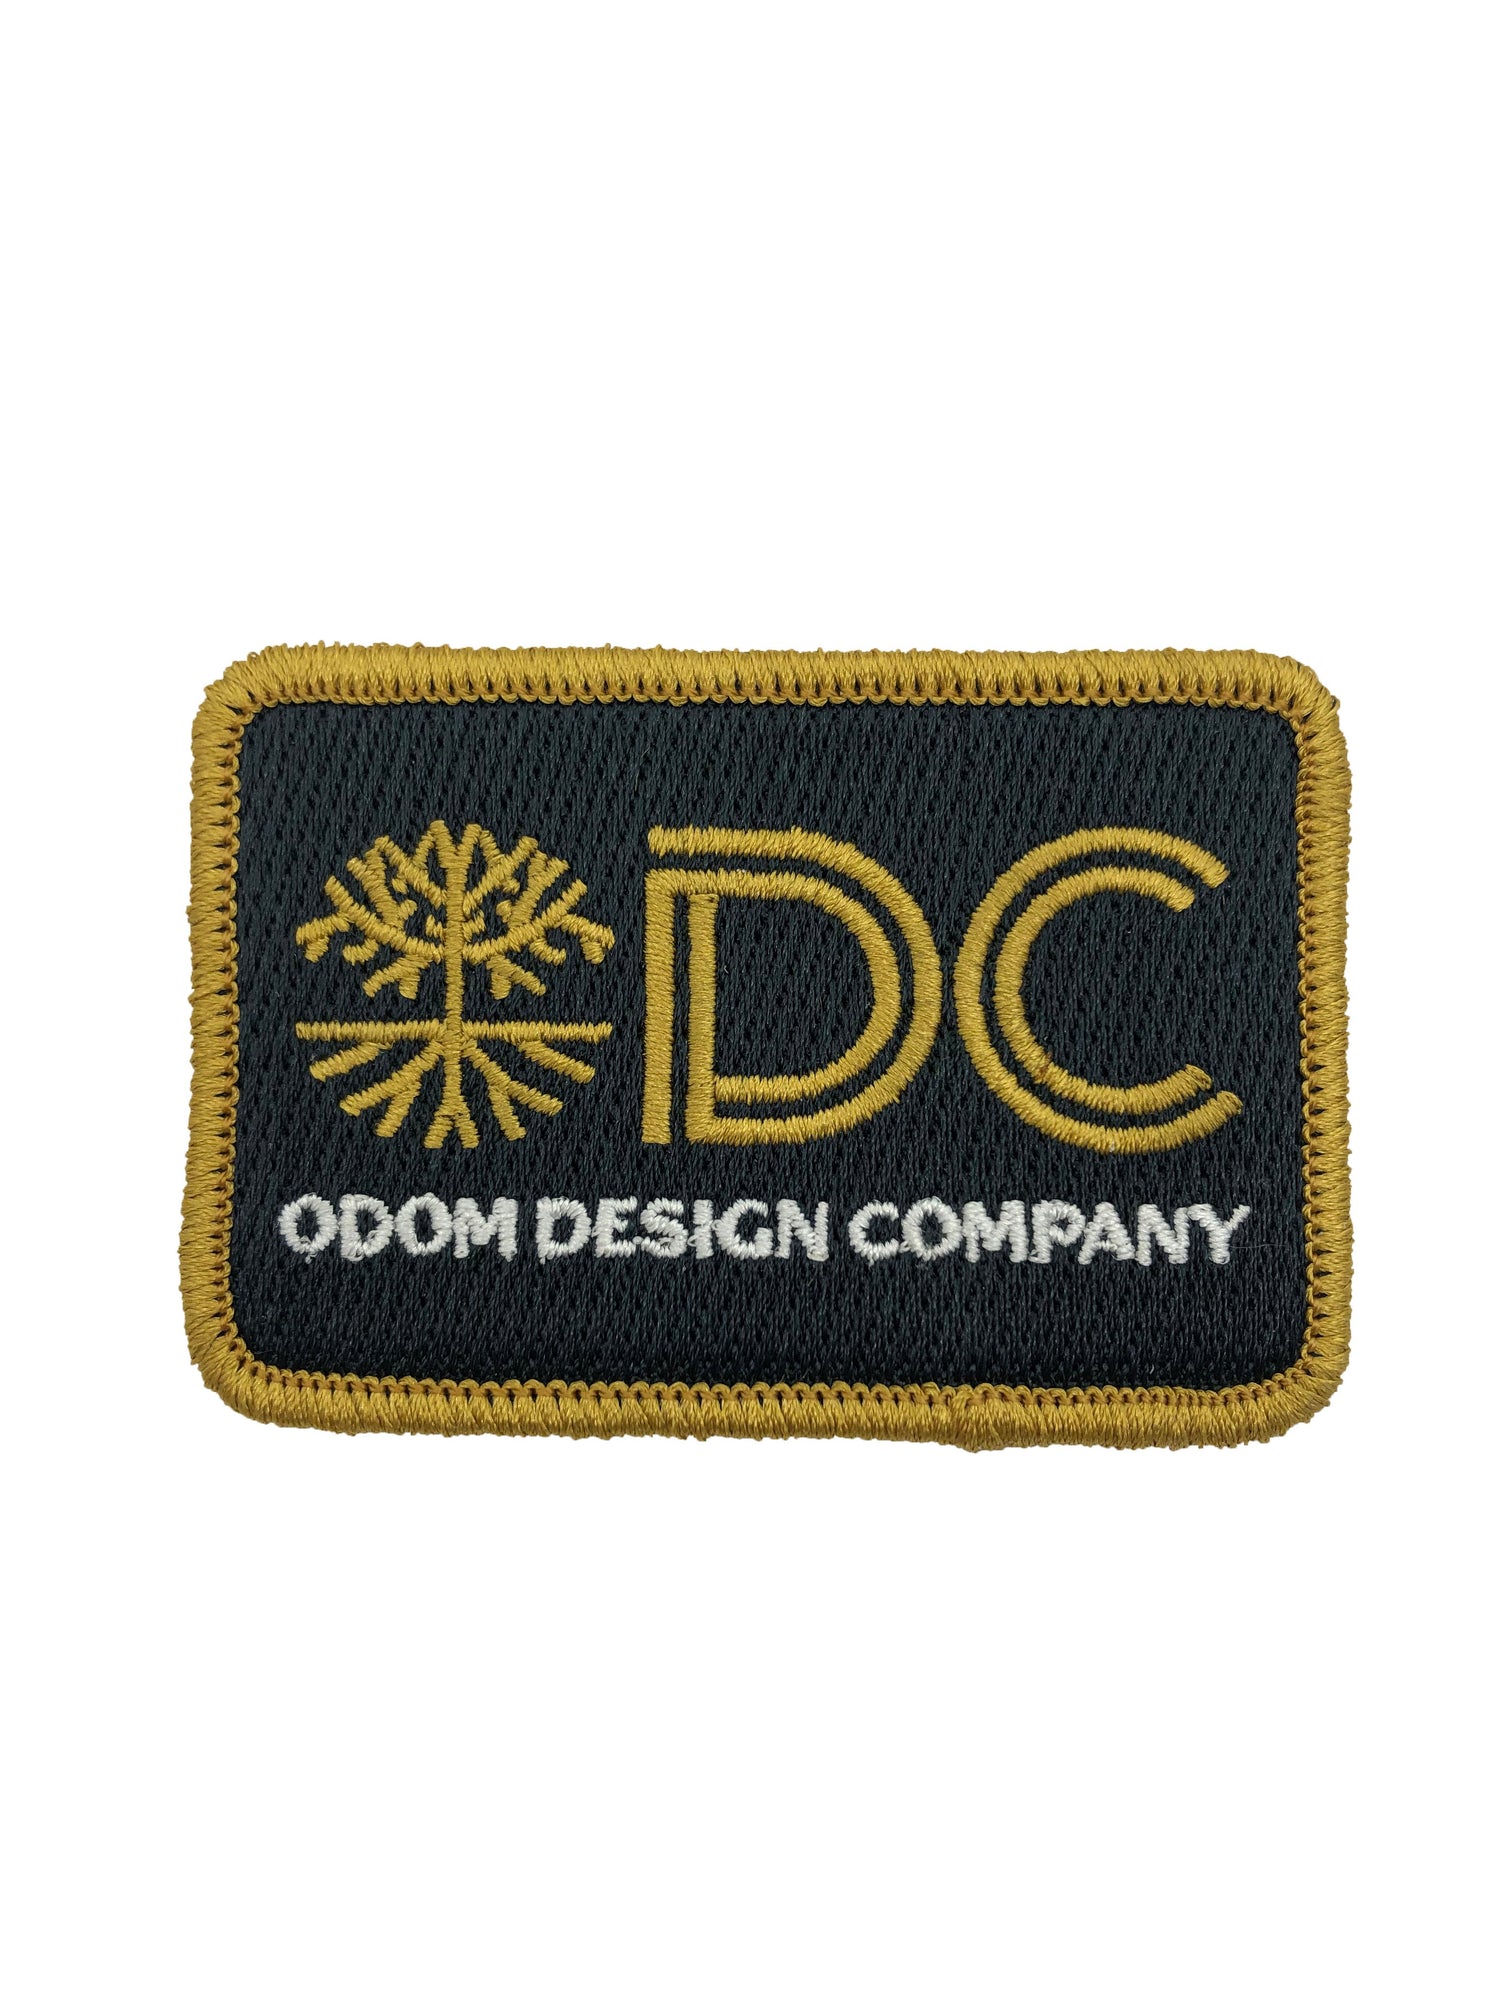 Custom Embroidered Logo Patch - Your company logo - Iron On Patch, Printed  Patch